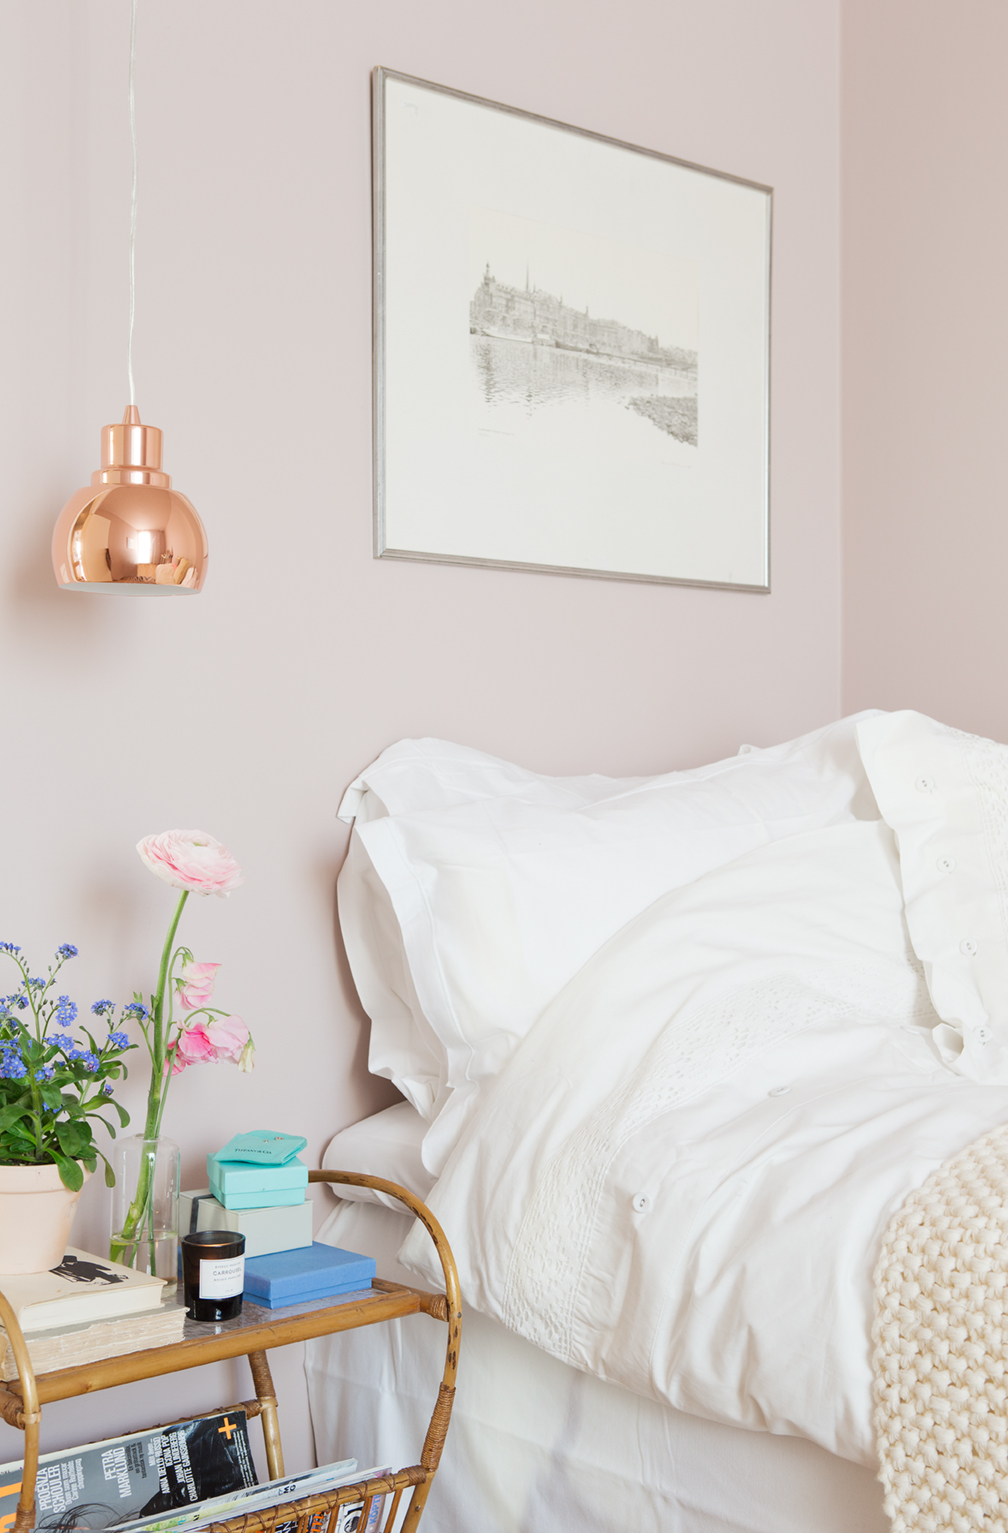 Copper Pink Bedroom Ideas That Will Amaze Every Lady